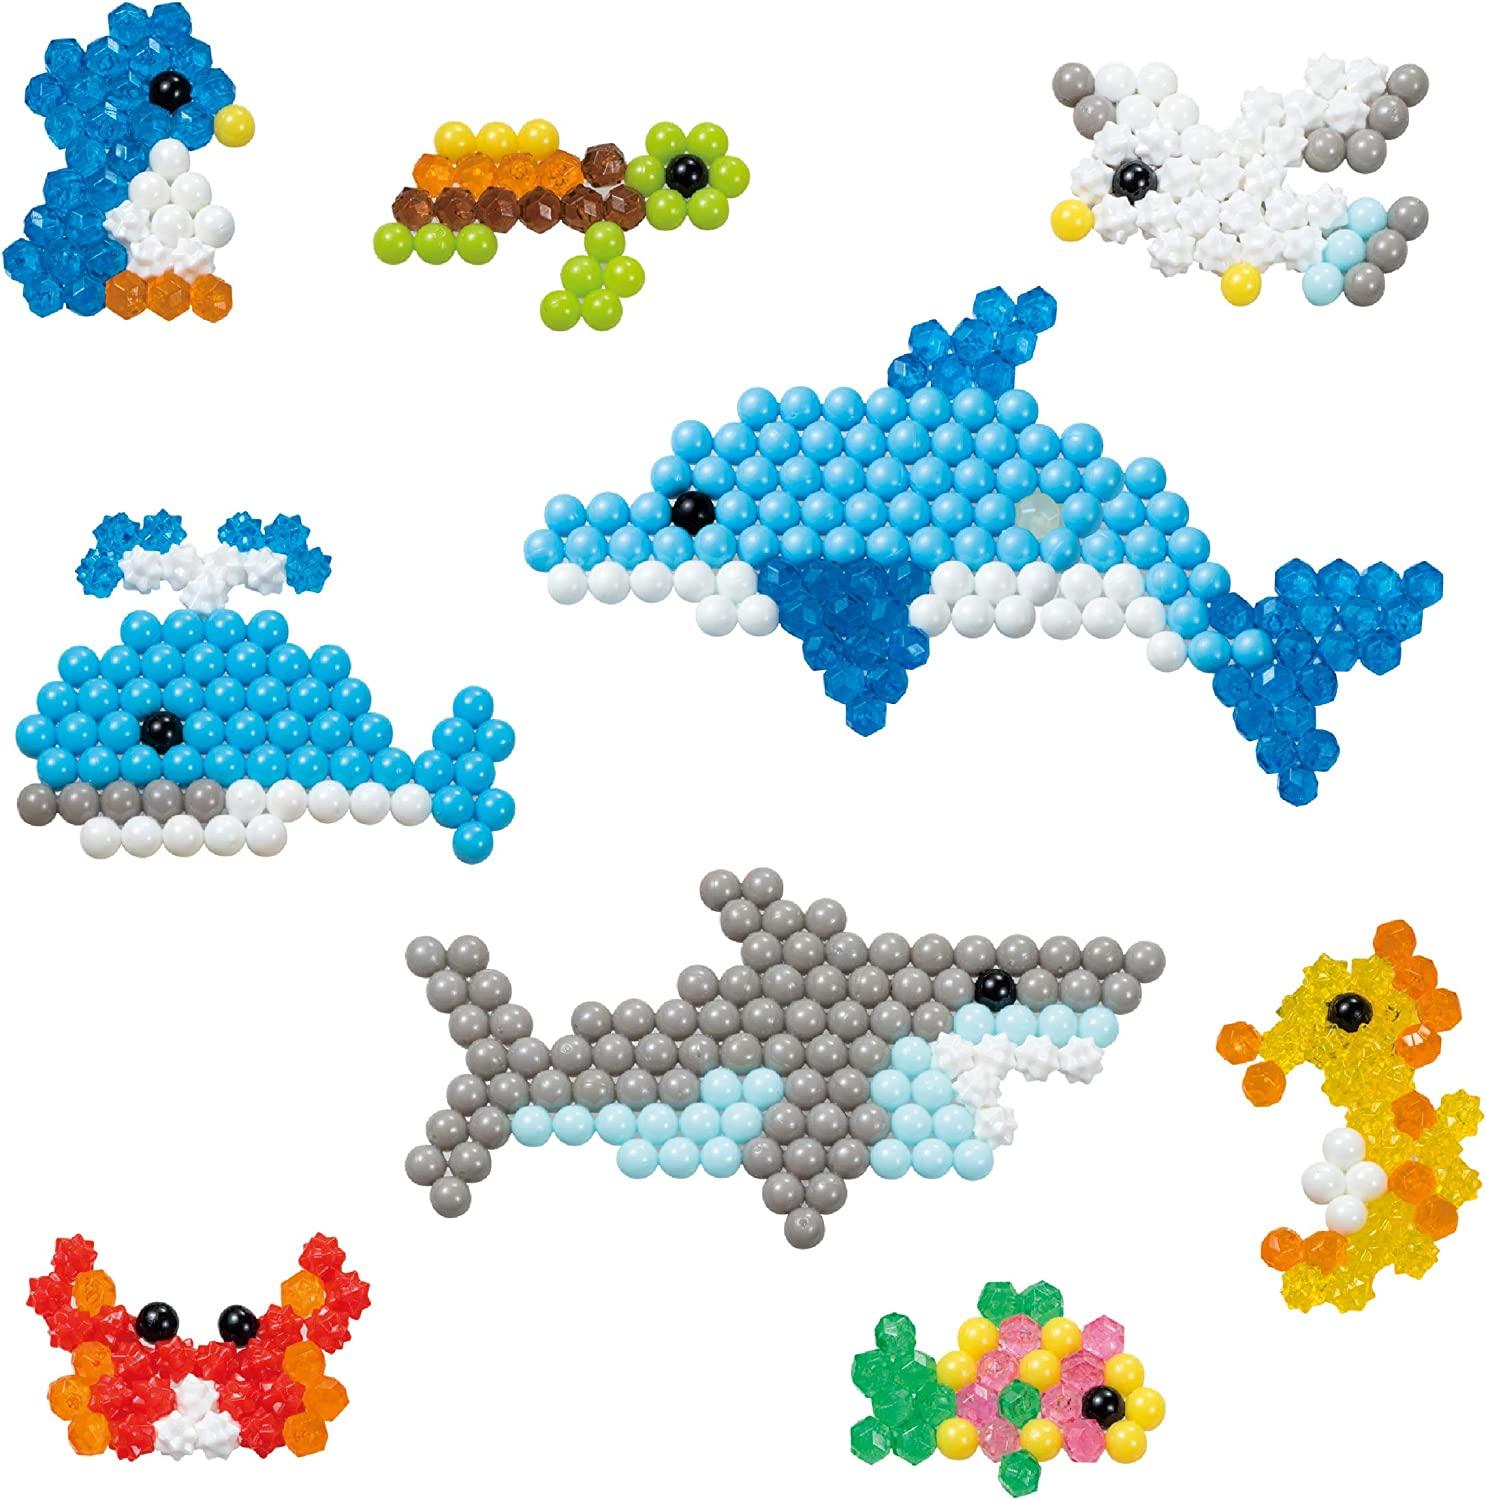 Aquabeads Arts & Crafts Ocean Life Theme Refill with Beads and